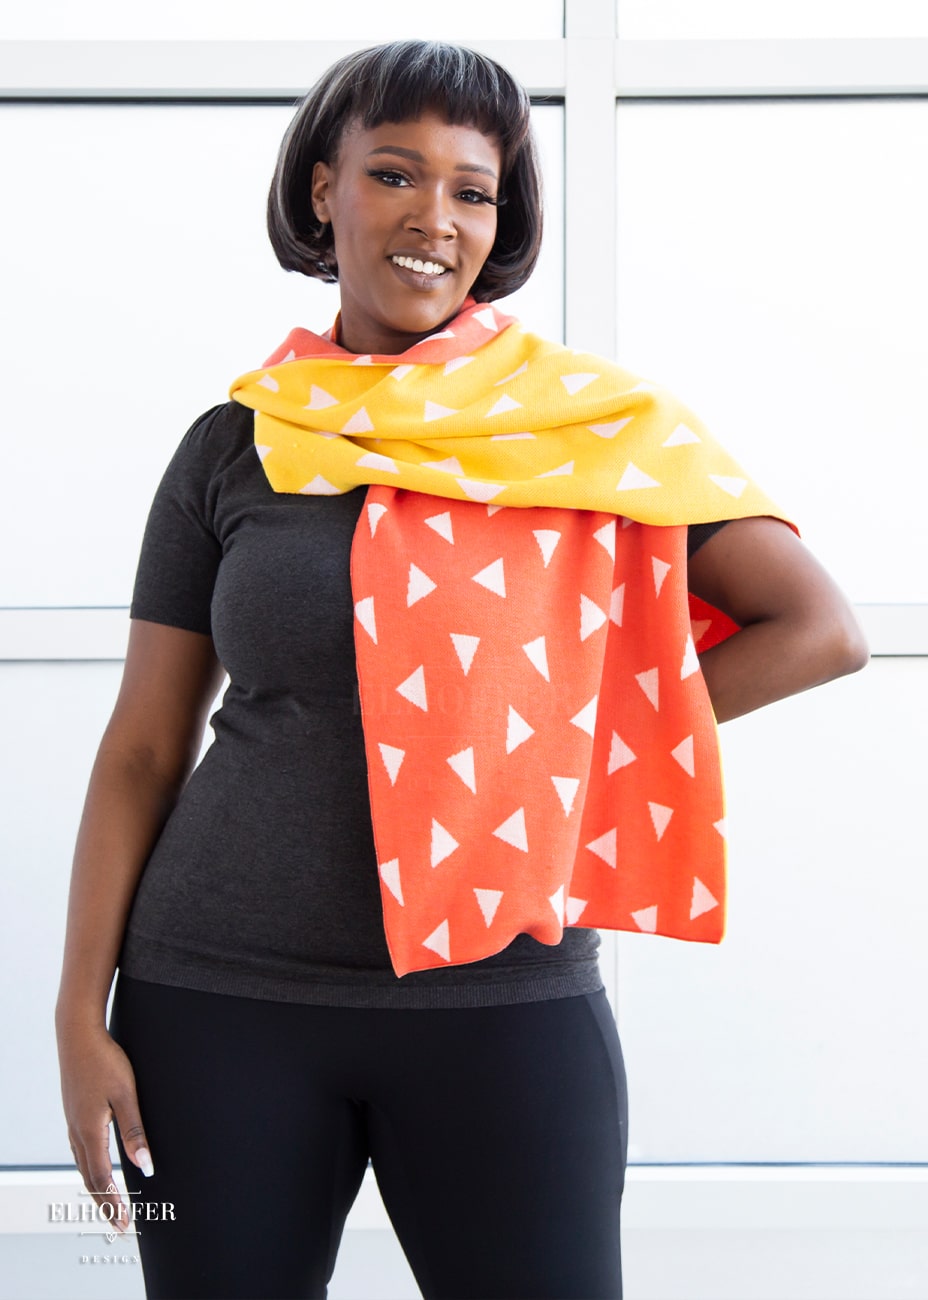 Lynsi, a medium dark skinned M model with short black and white hair, is smiling while wearing a reversible knit scarf.  One side of the scarf is orange with white triangles and the other side is yellow with white triangles.